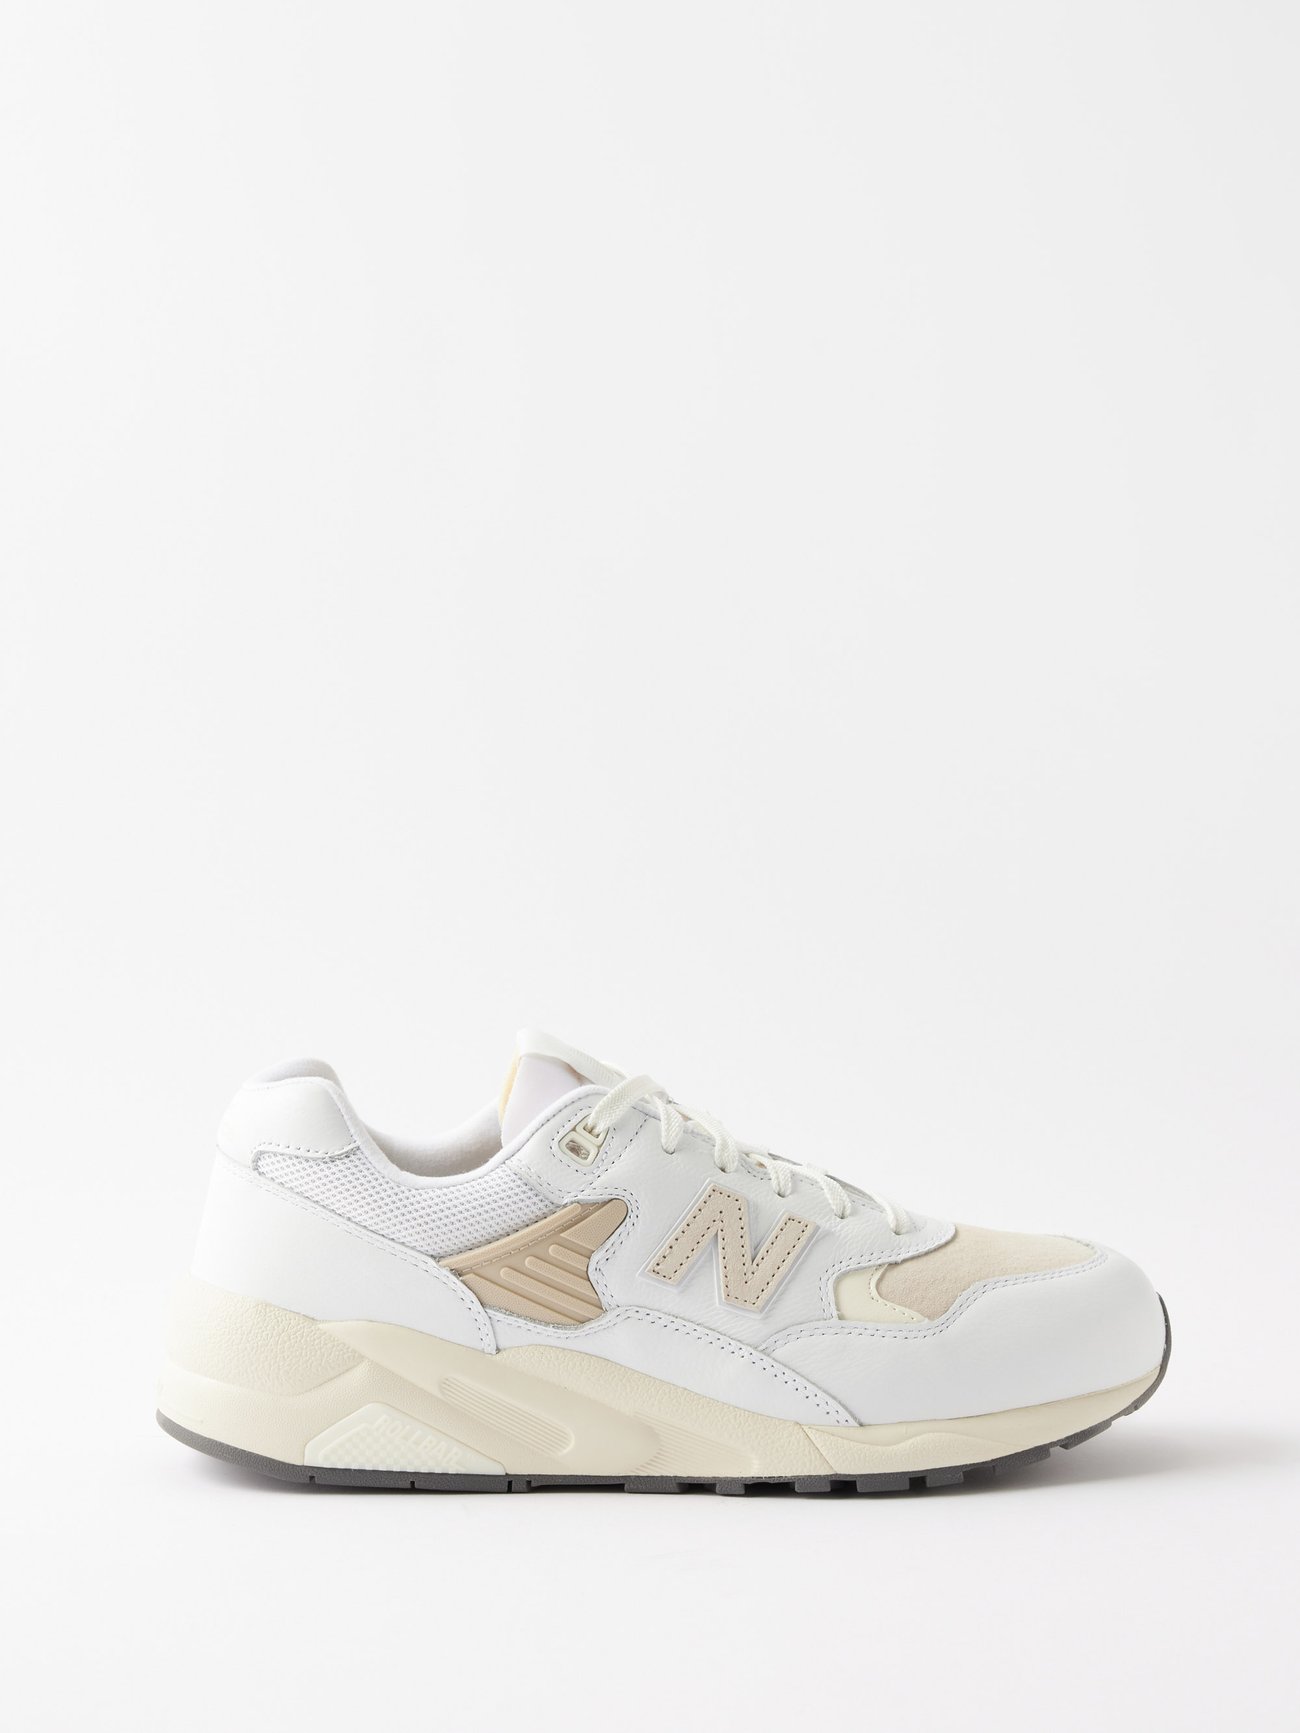 White 580 leather and mesh trainers | New Balance | MATCHES UK